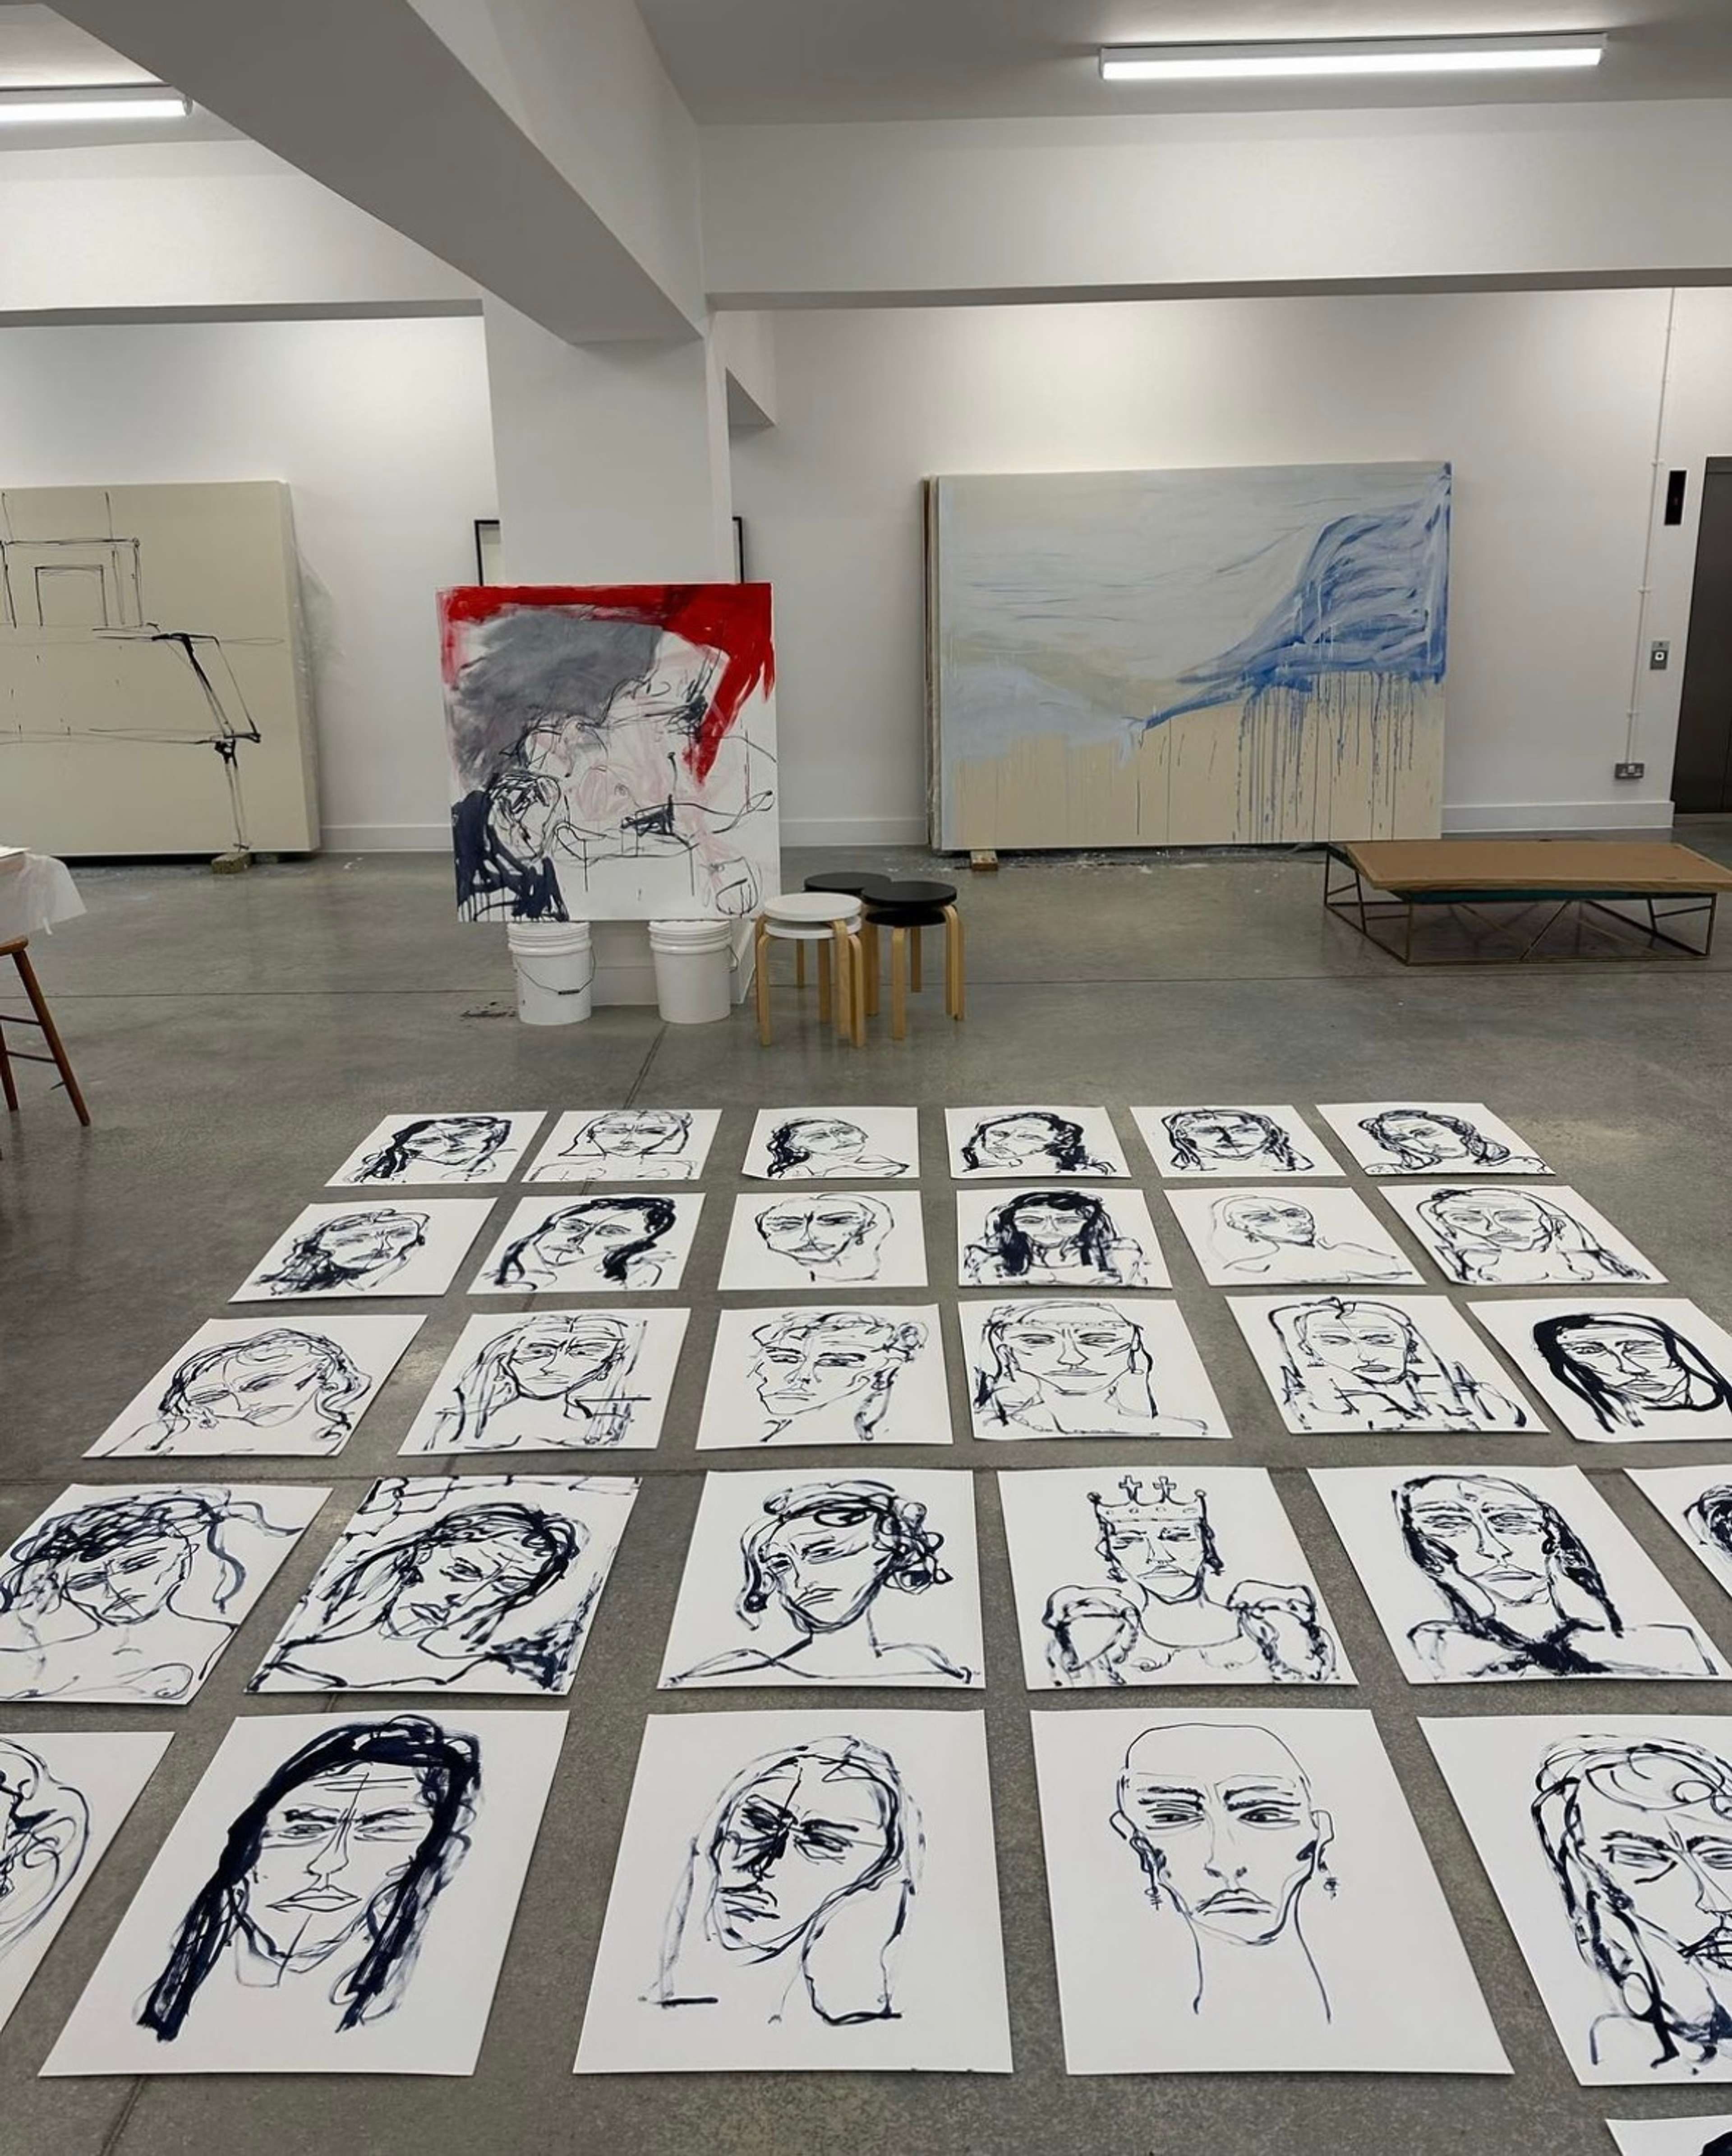 A photograph of Tracey Emin's studio, capturing the preliminary drawings of her female portraits for The Doors at the National Portrait Gallery in London. The blue ink drawings are spread across the floor in the order Emin planned for the execution of the bronze doors.